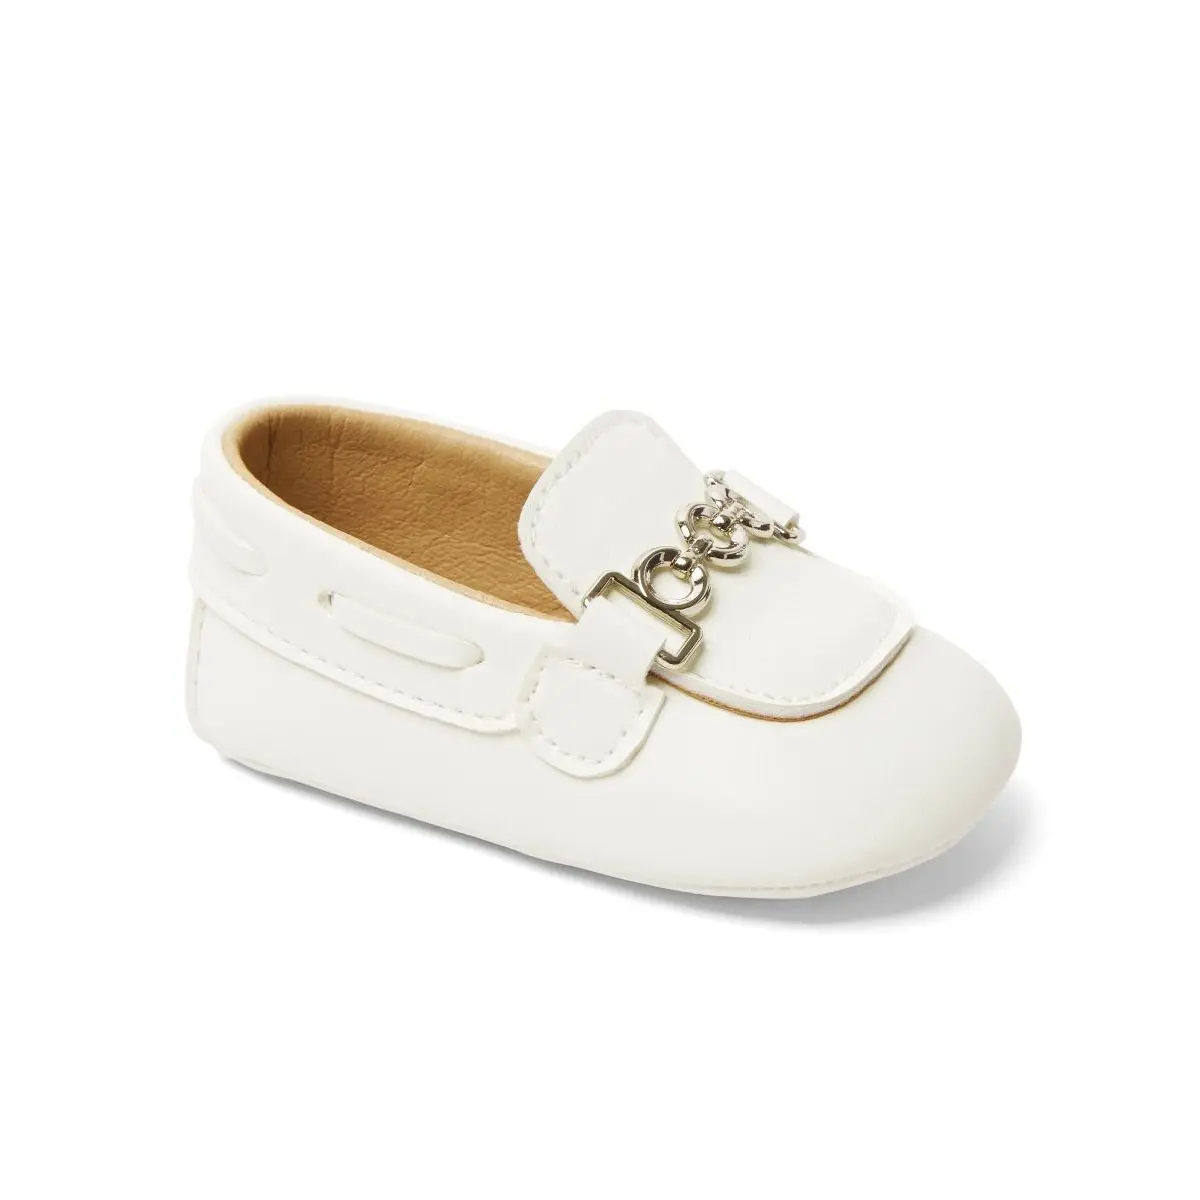 White Leather Pre-Walker Shoes